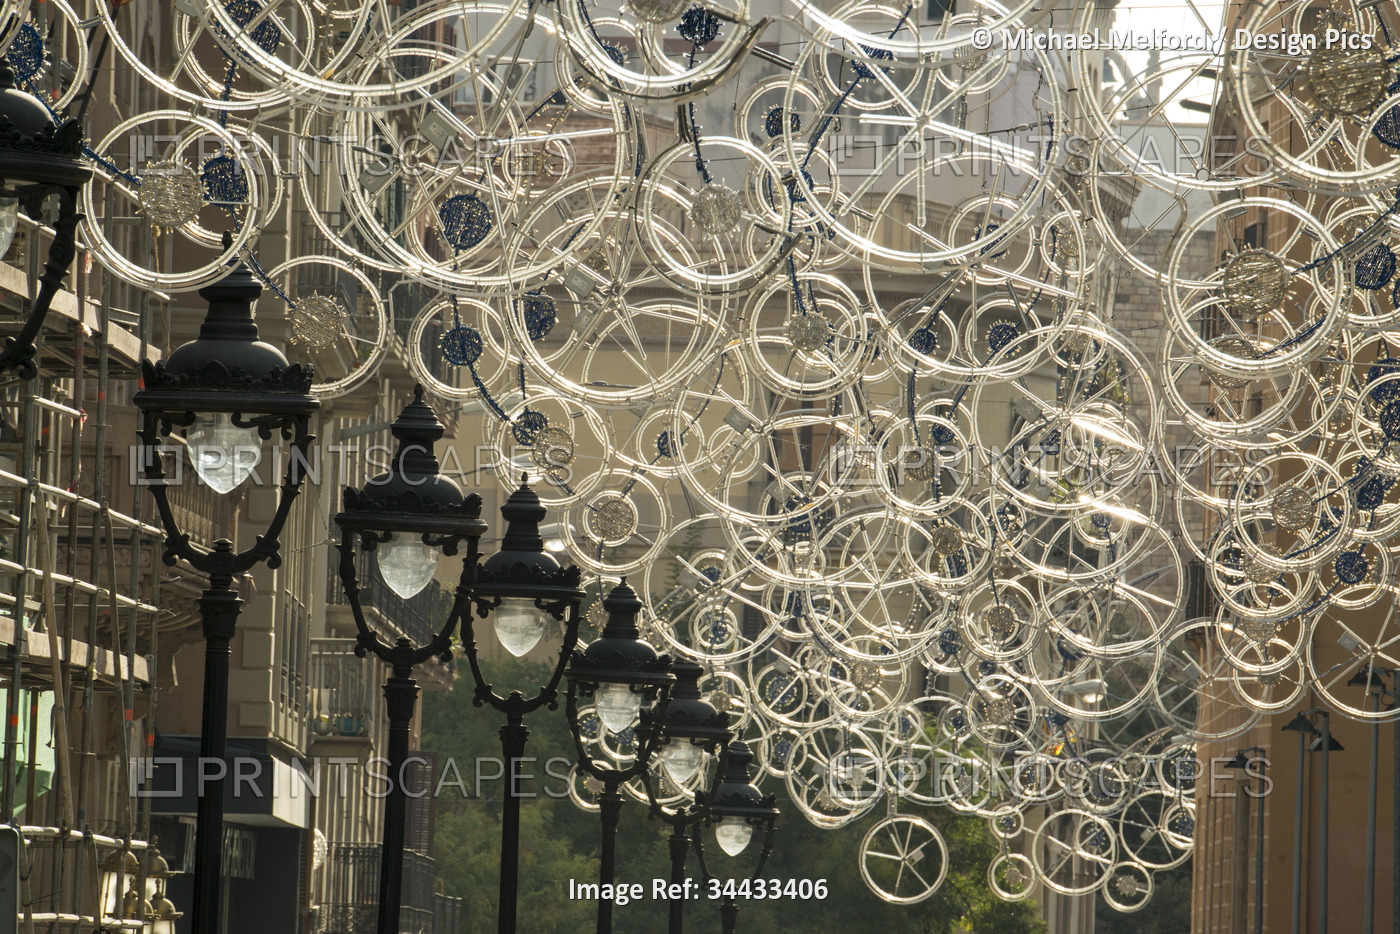 Bicycle parts turned into hanging art; Barcelona, Spain